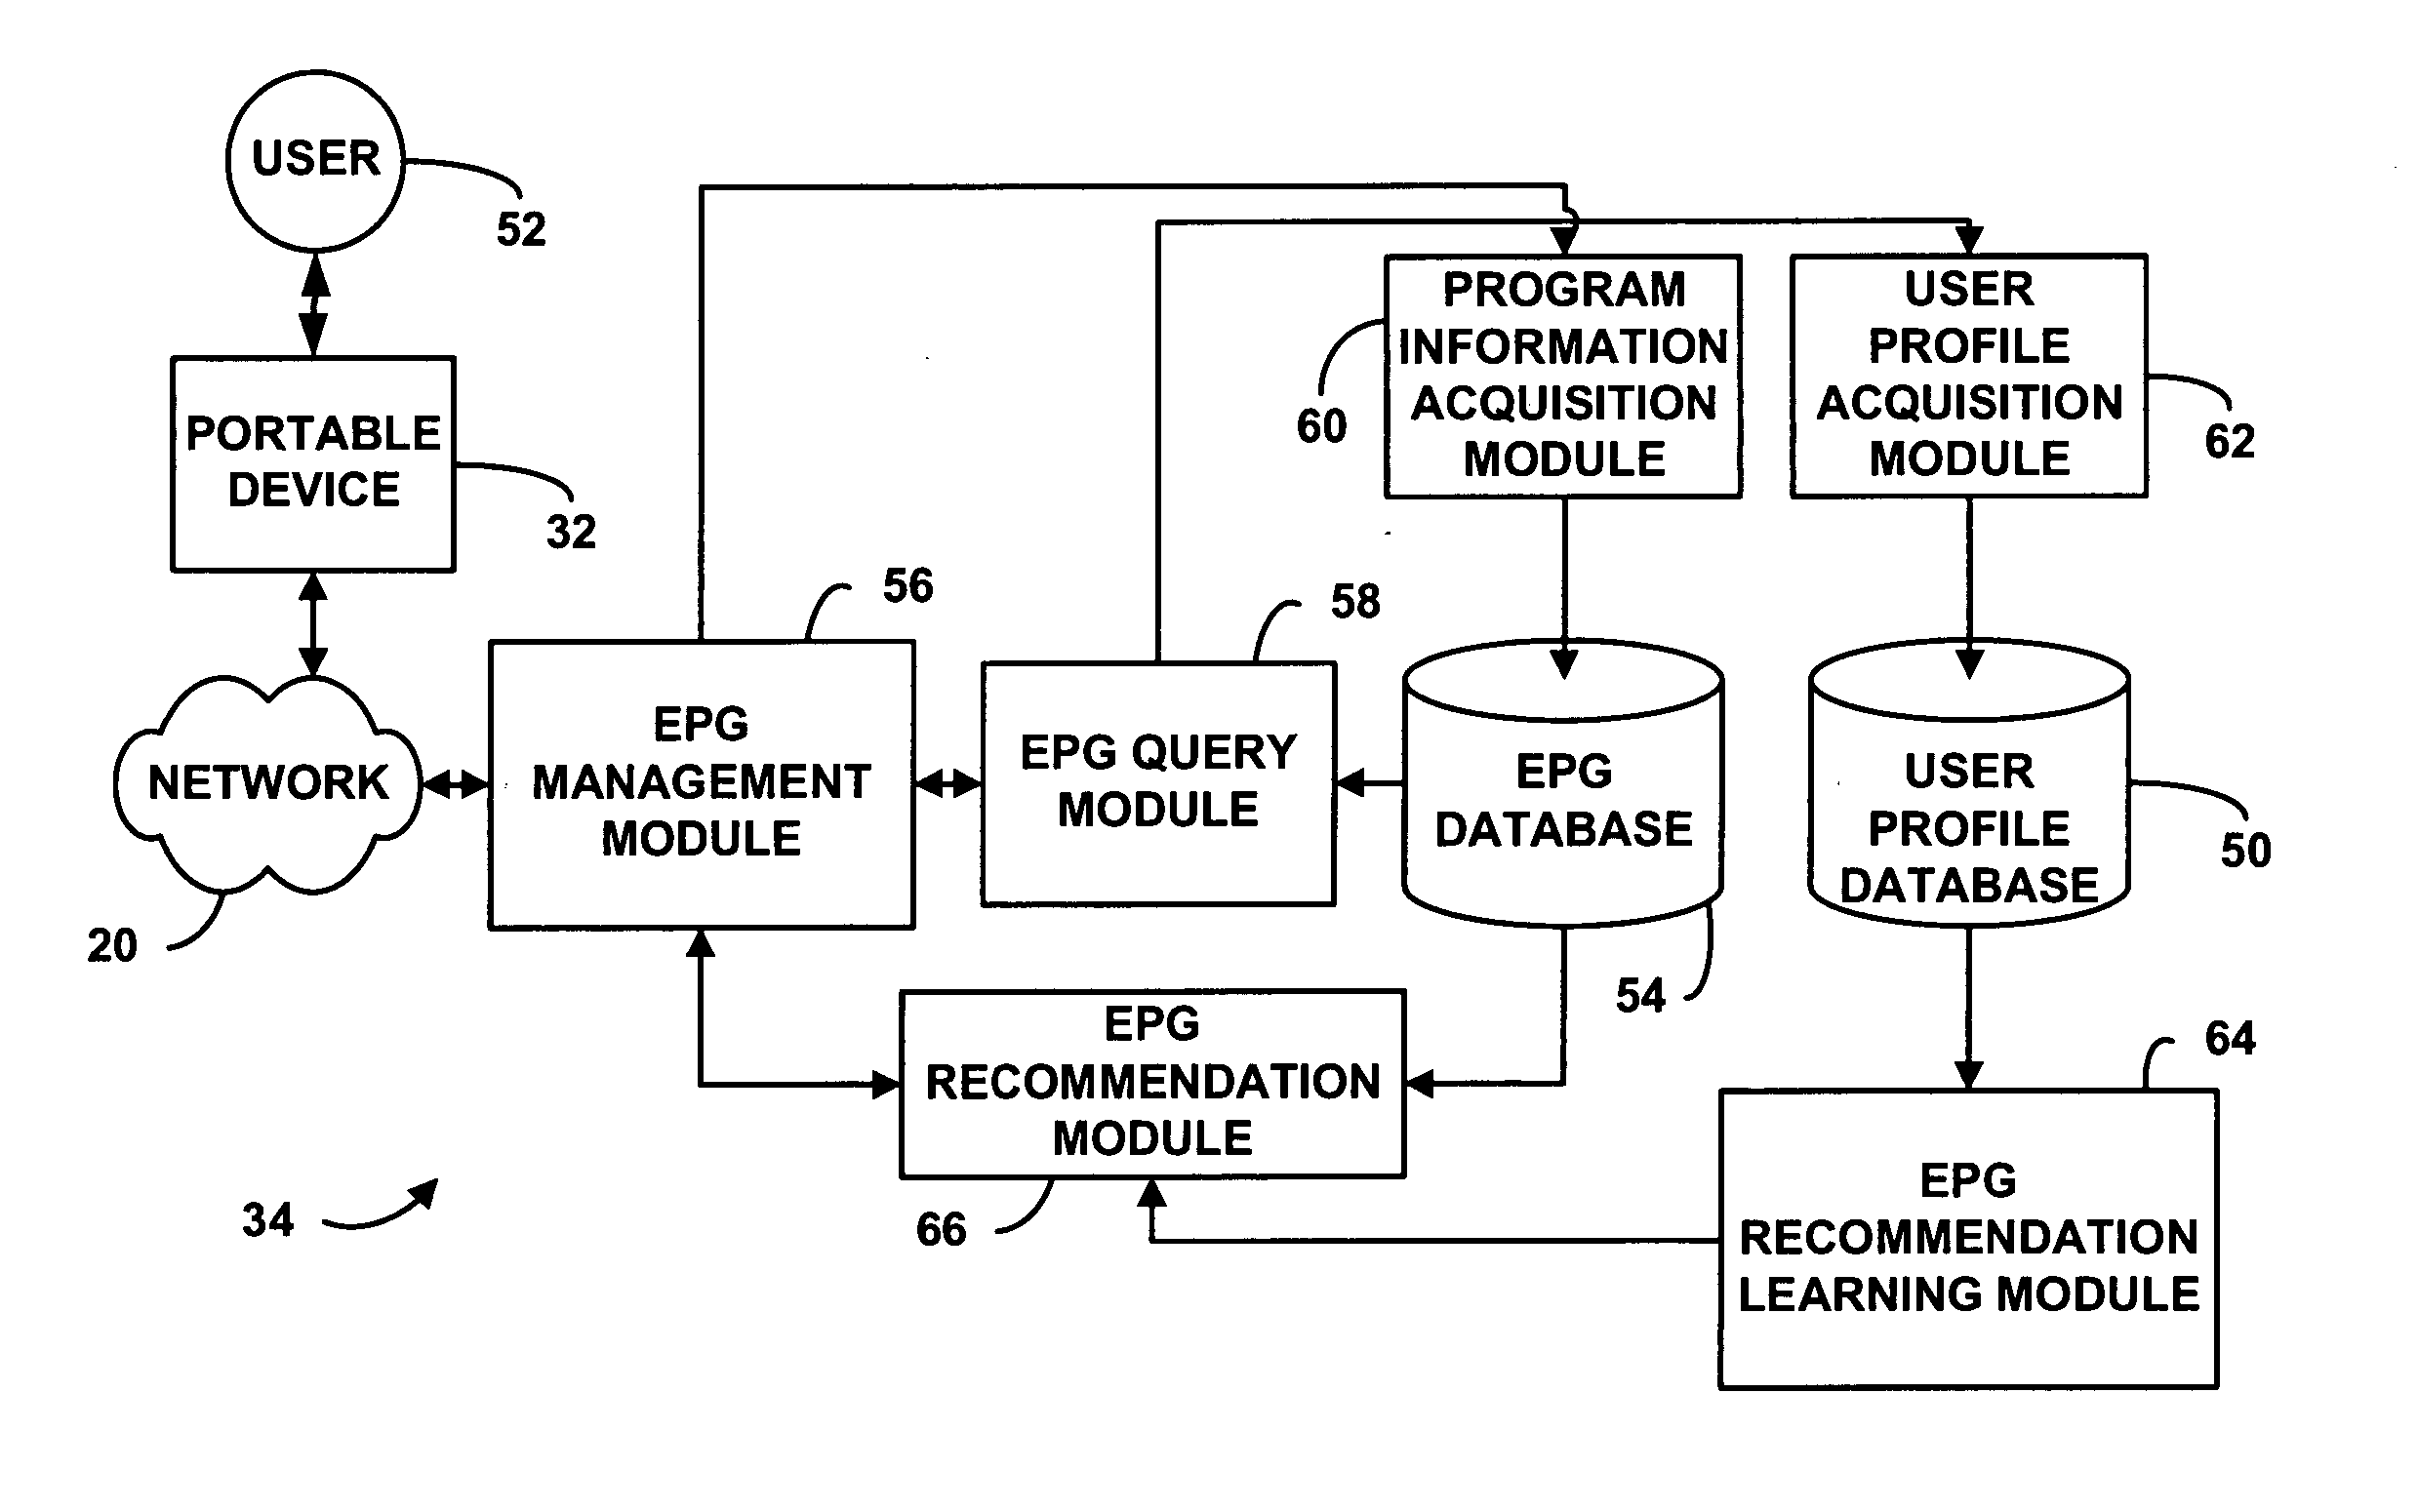 Programming guide content collection and recommendation system for viewing on a portable device